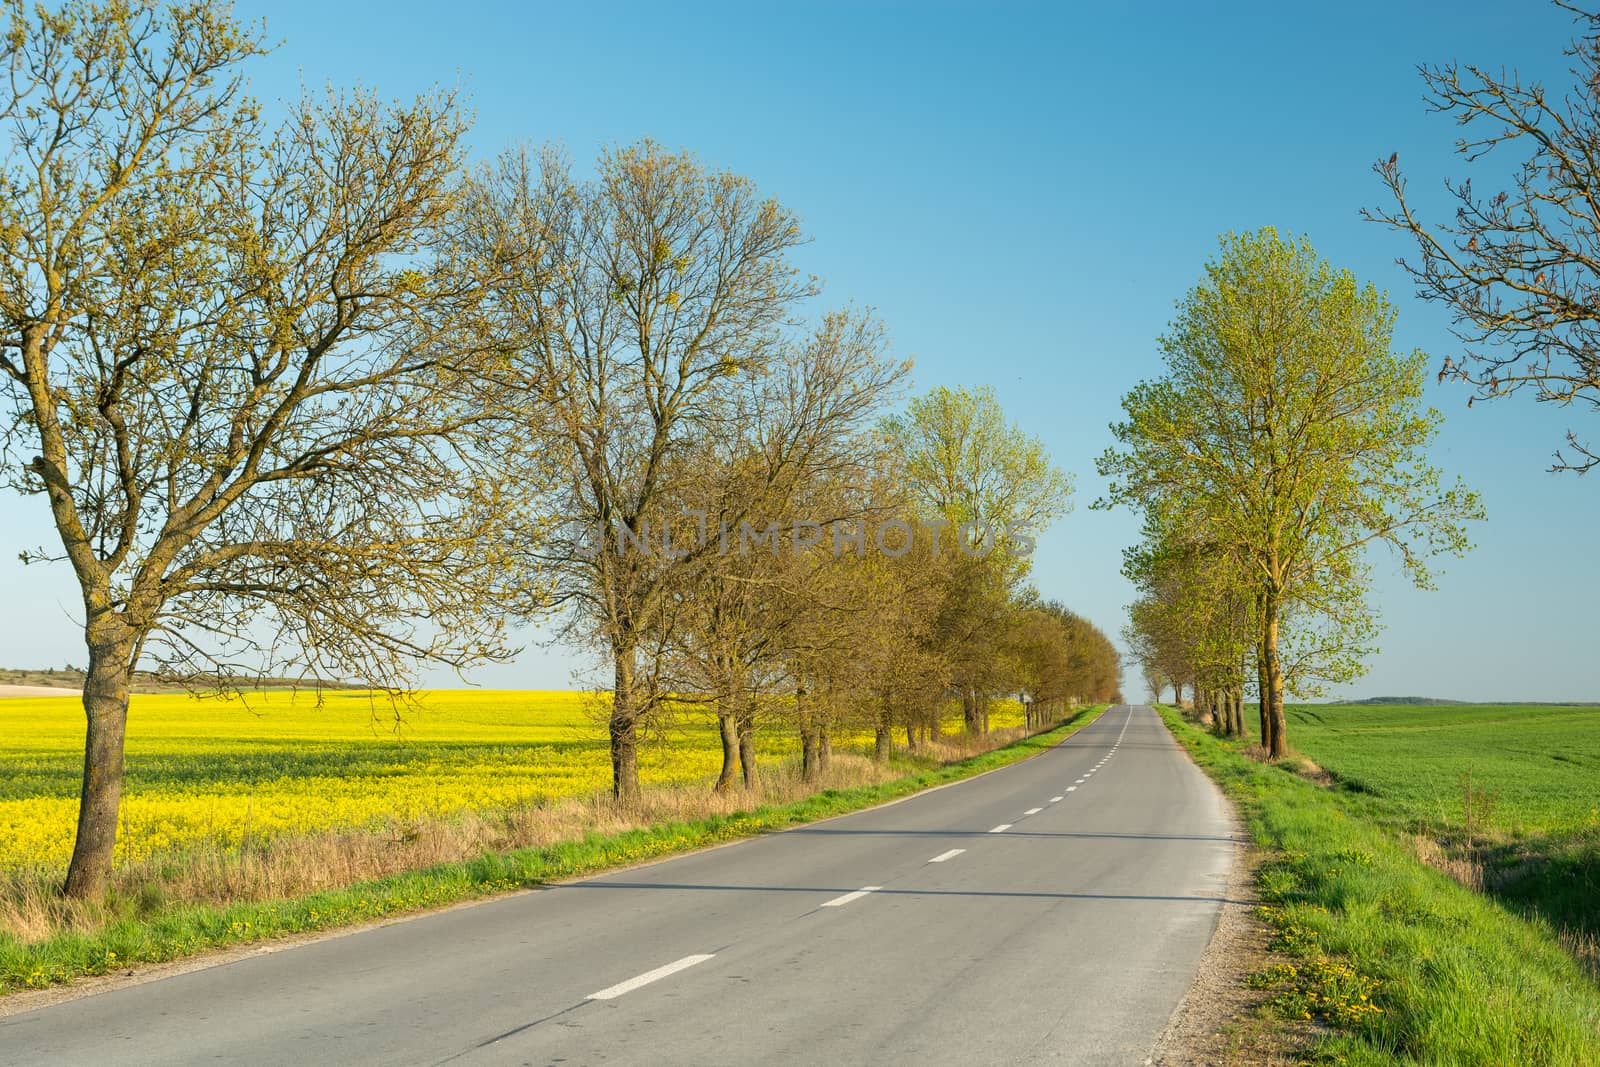 Trees on an asphalt road and a rape field, spring view